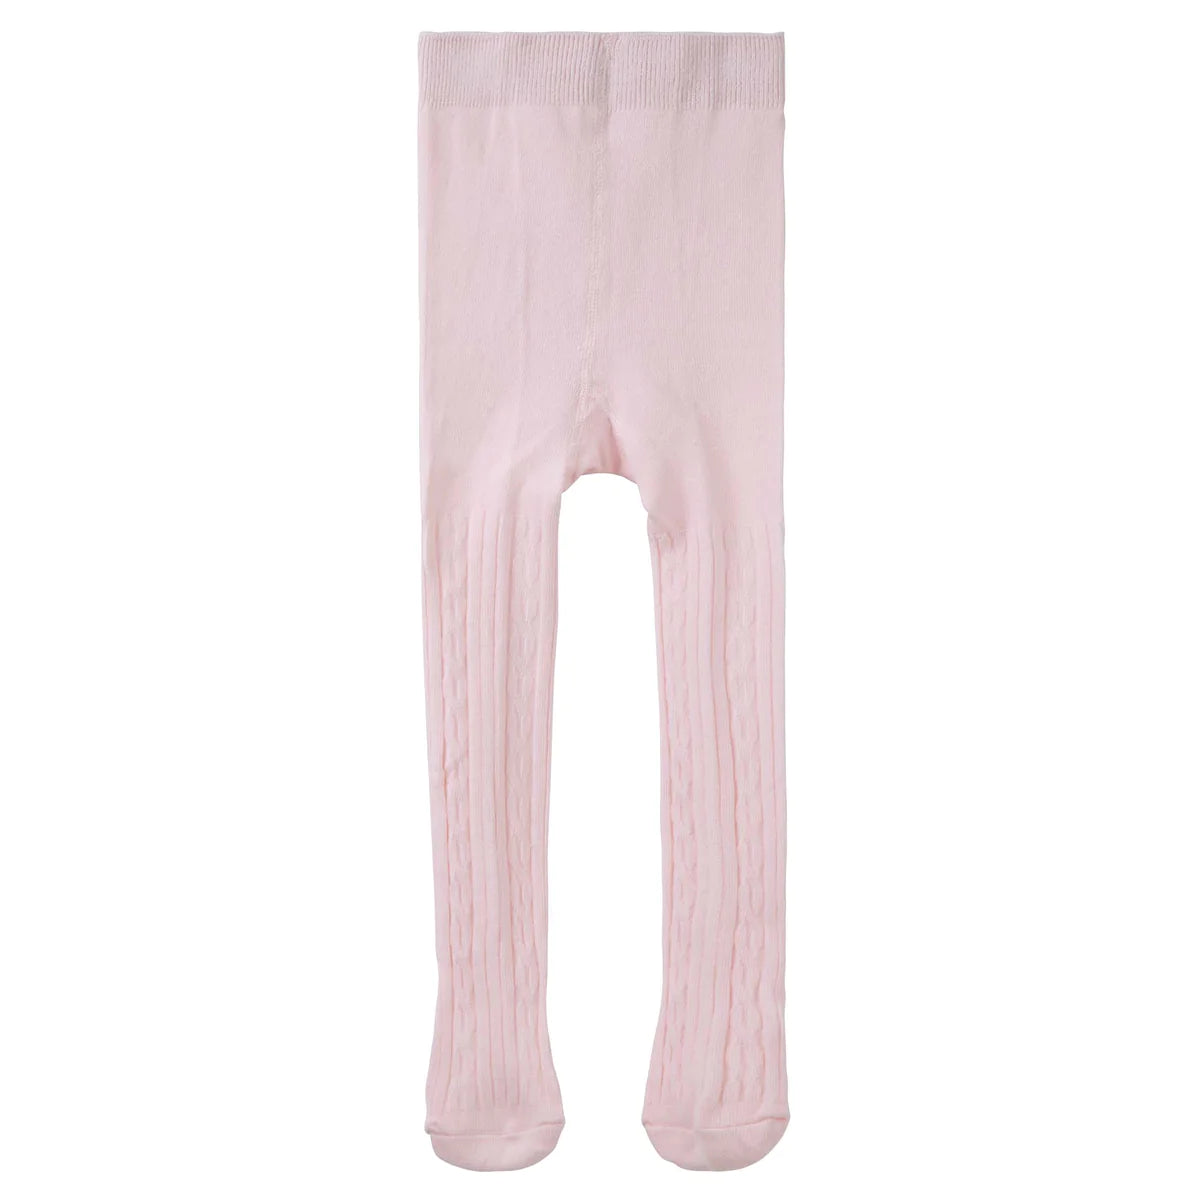 Designer Kidz Baby Cable Knit Tights - Pink